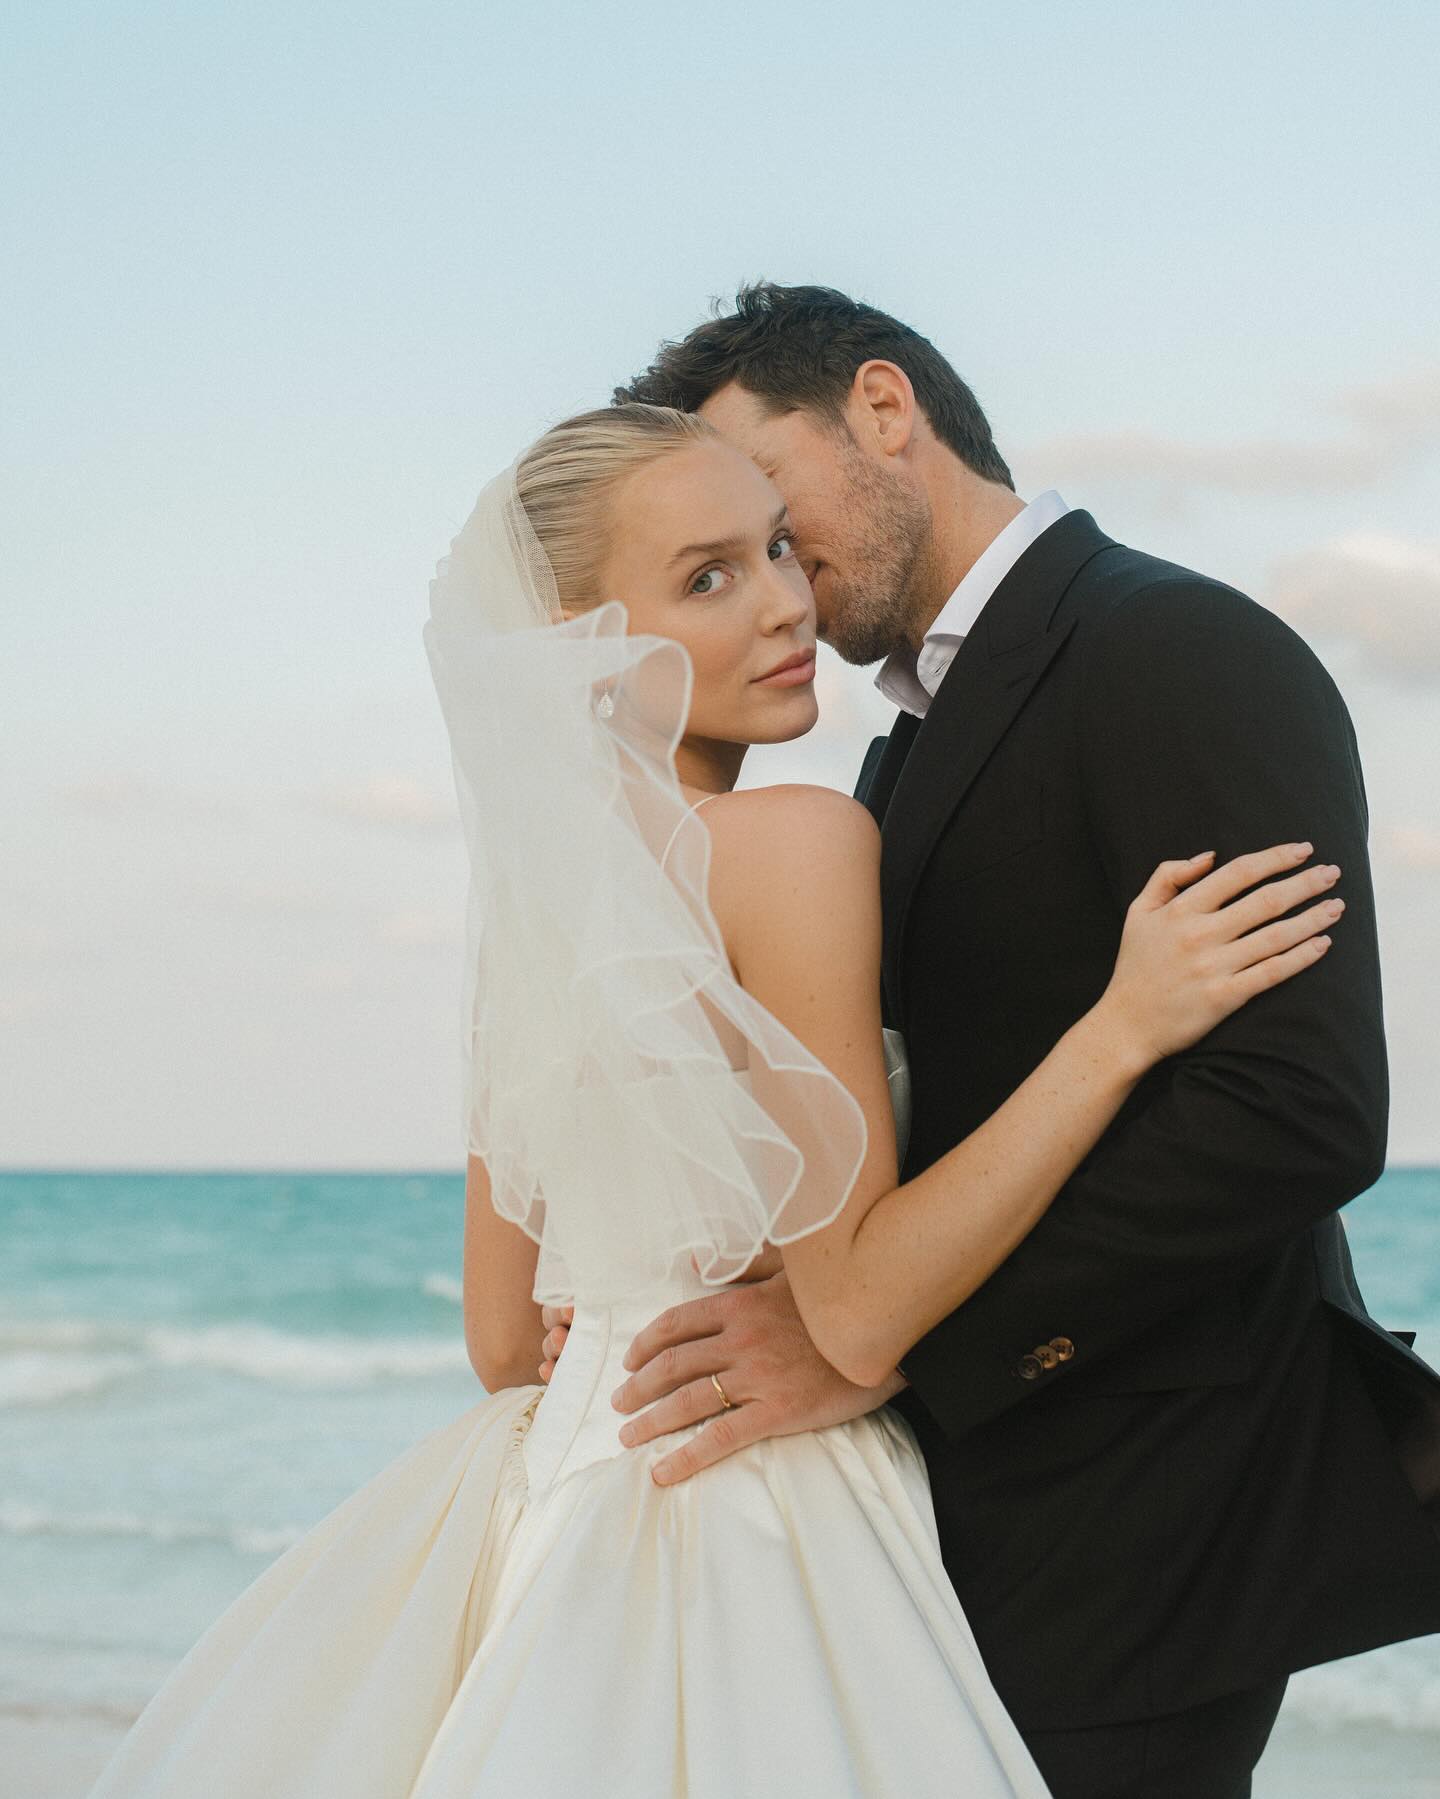 ‘Call Her Daddy’ Host Alex Cooper’s Destination Wedding Rocks Mexico with Glamor and Romance!